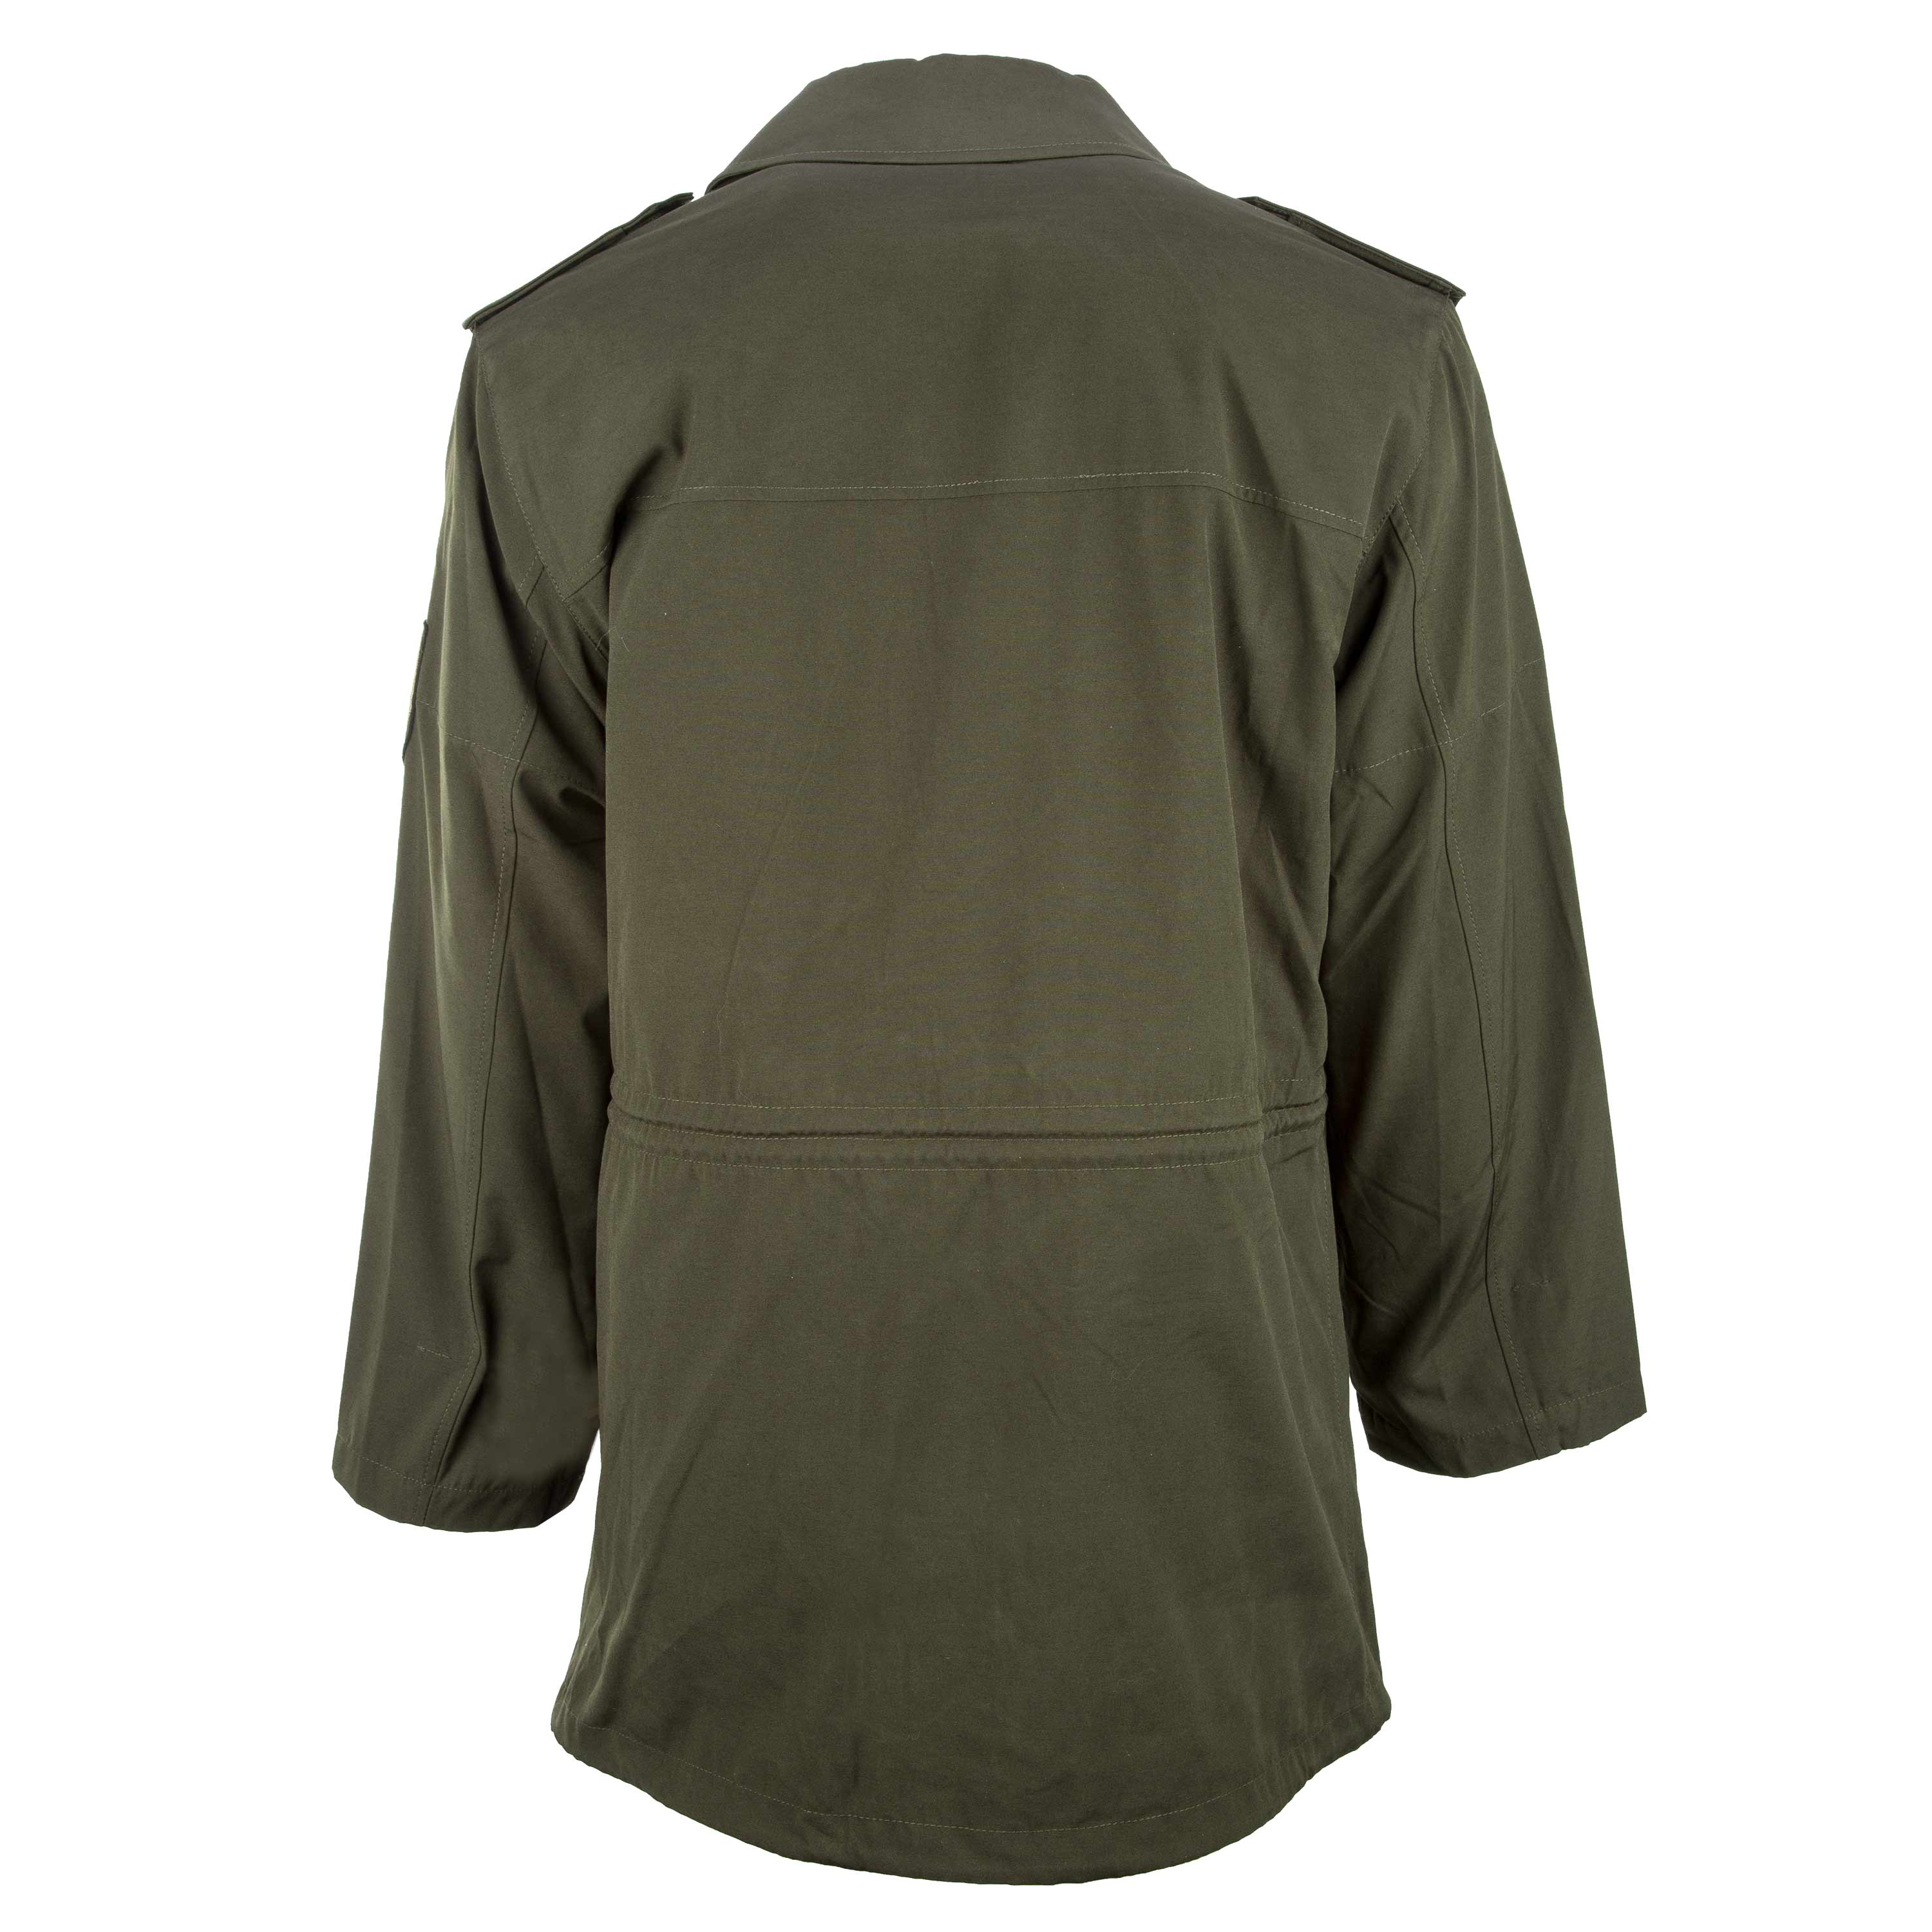 Purchase the CZ/SK Service Parka M98 Used by ASMC